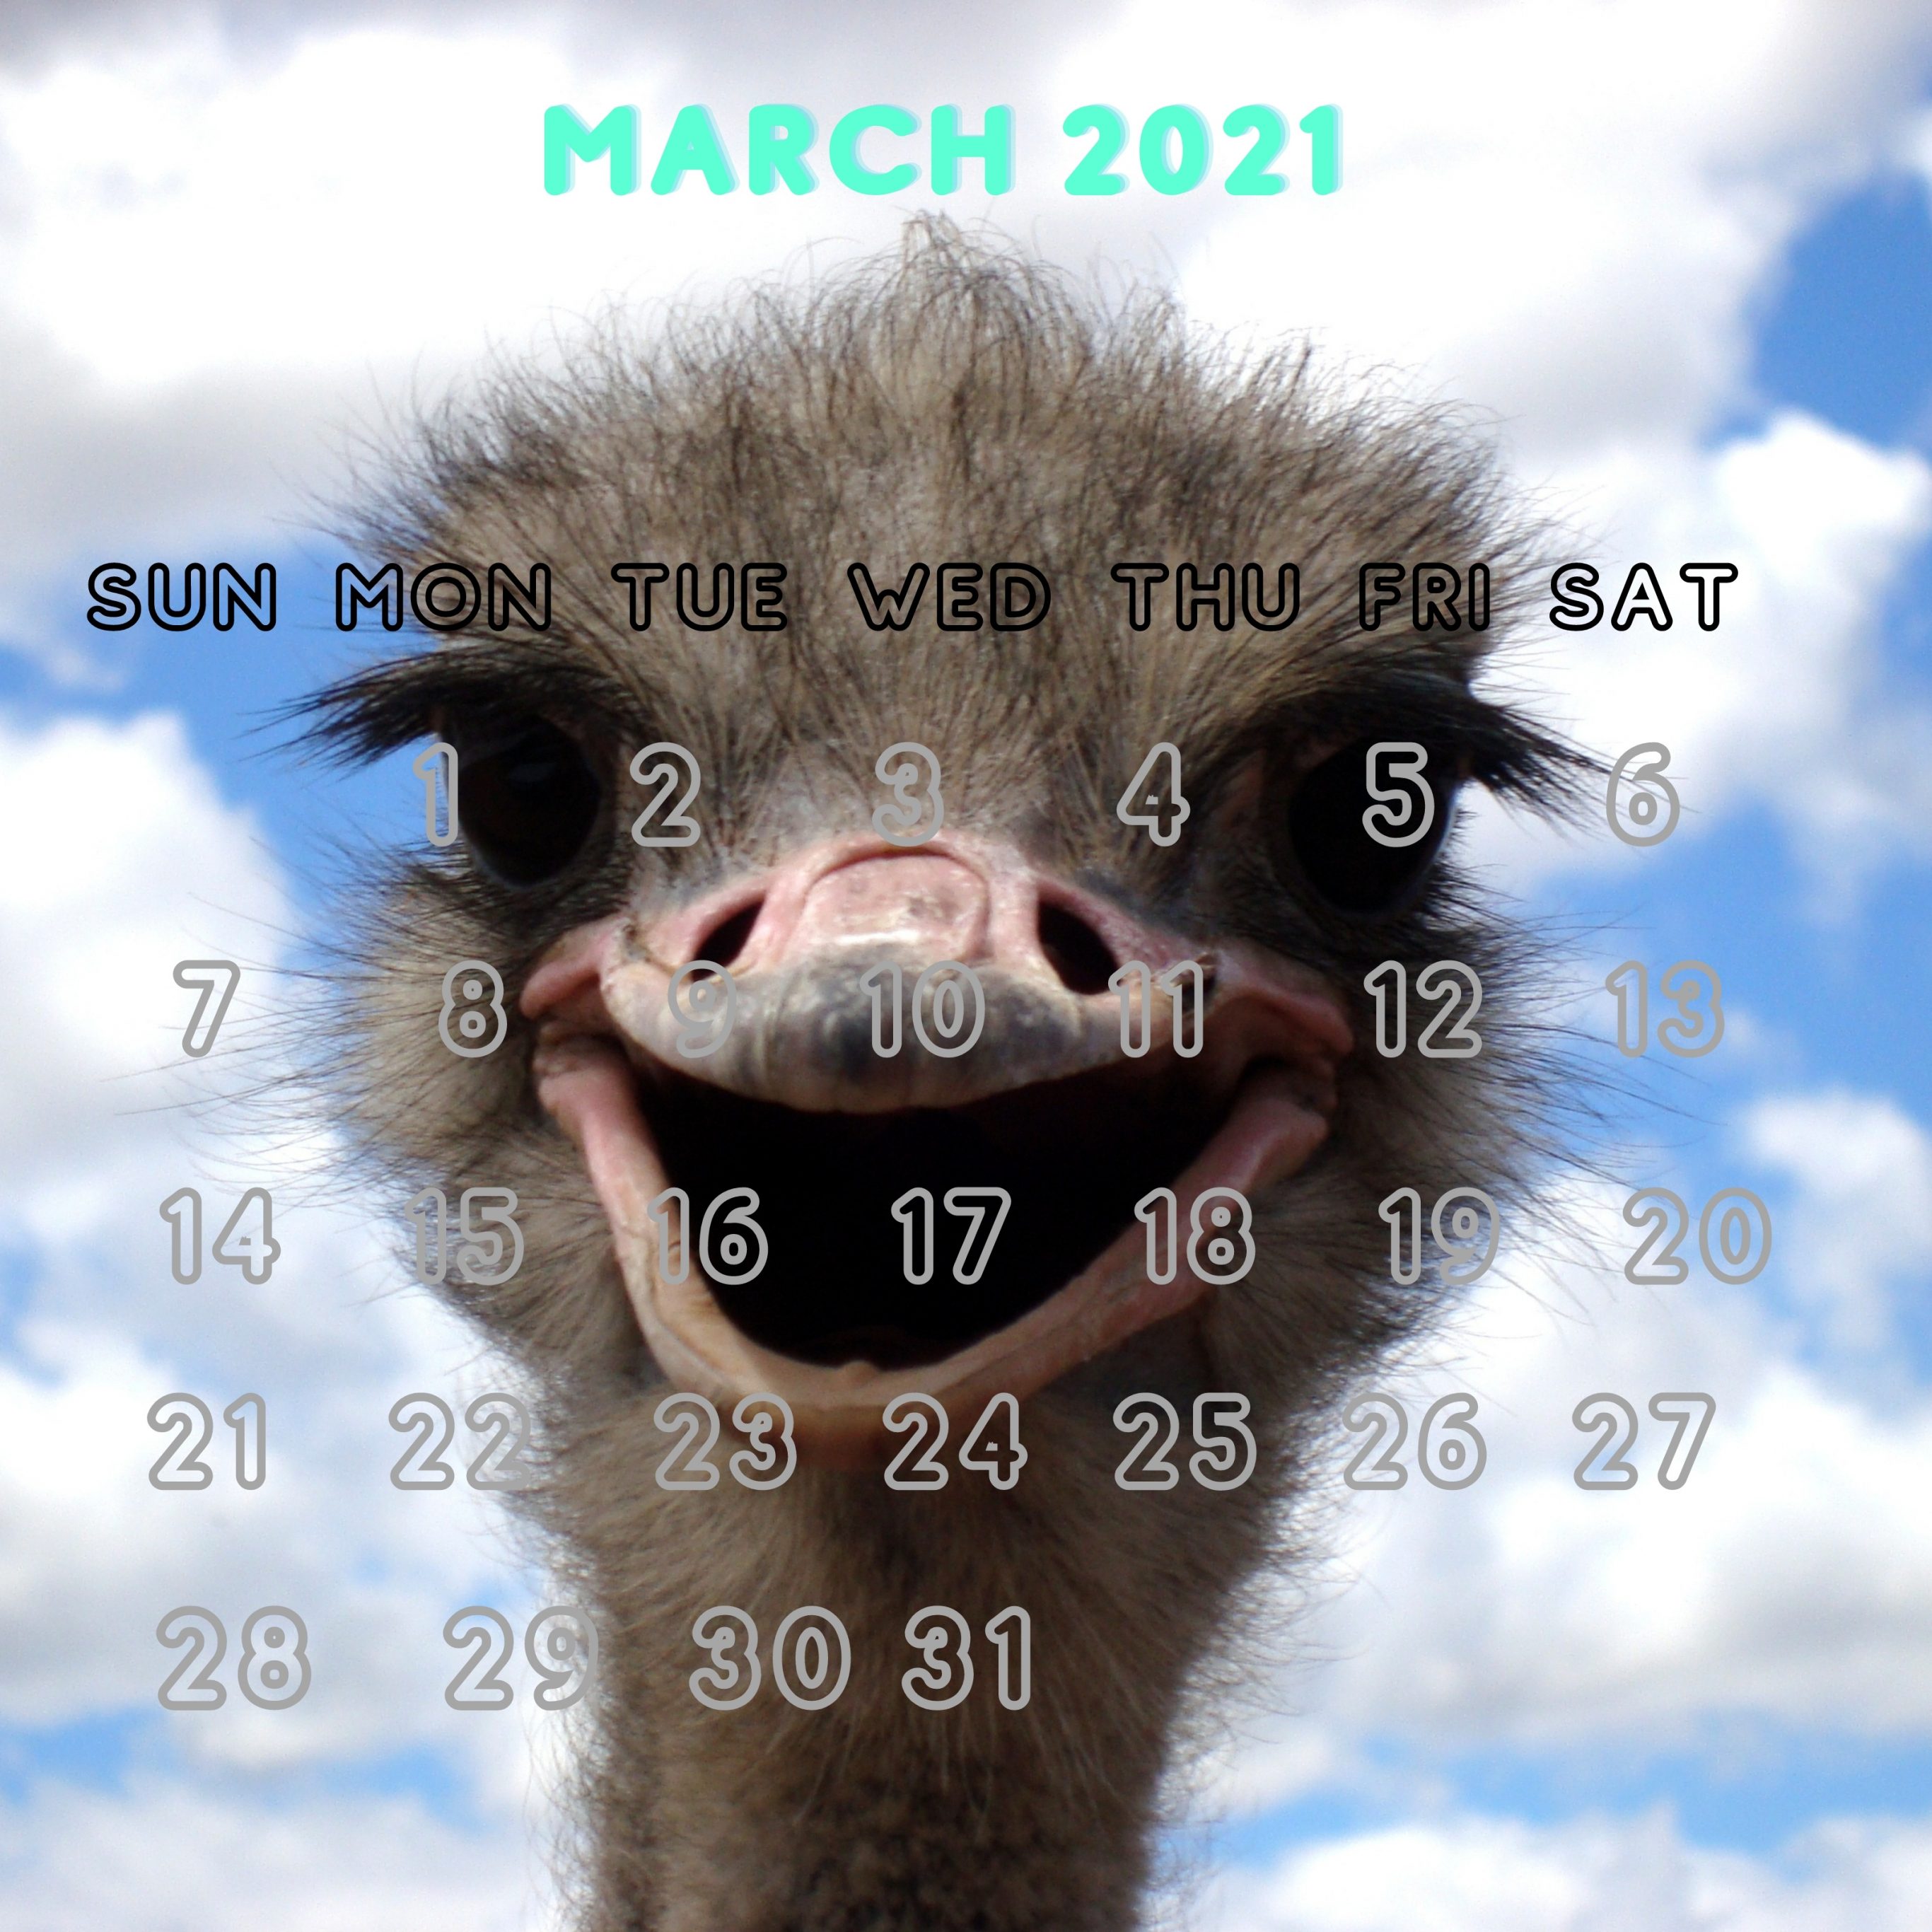 iPad Pro 12.9 wallpapers March 2021 Ostrich Smiling iPad Wallpaper